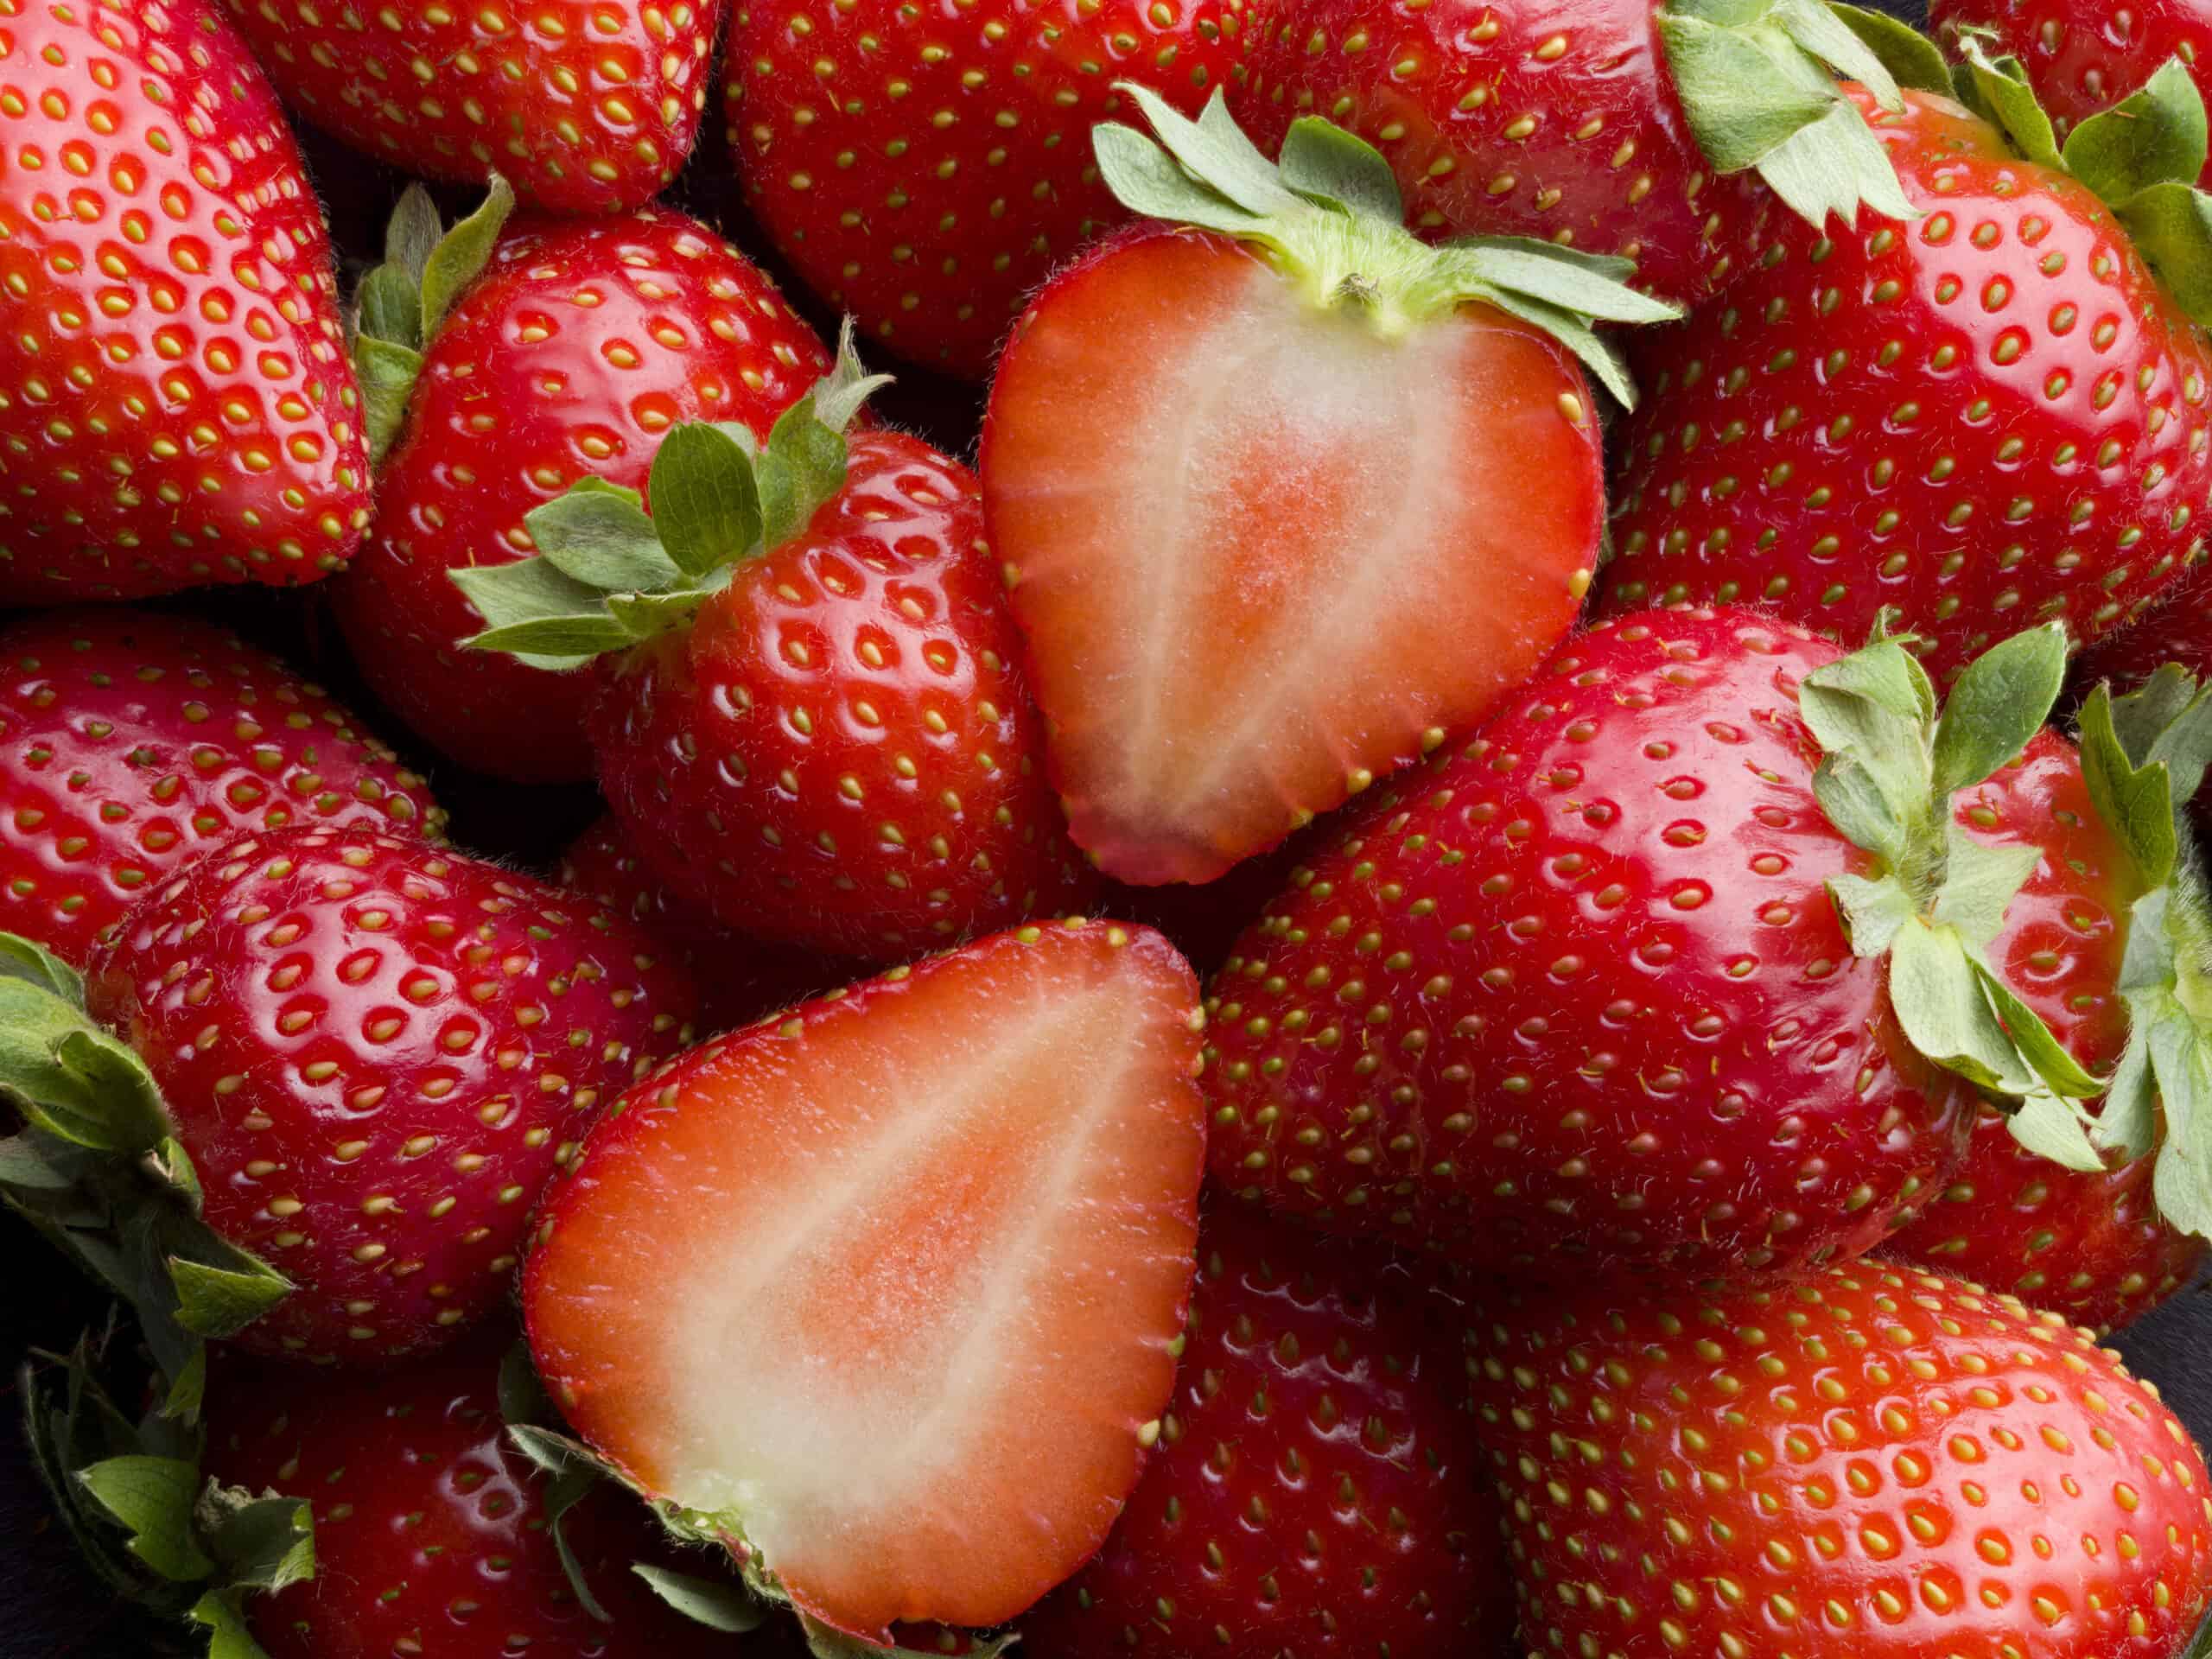 Close up image of strawberries